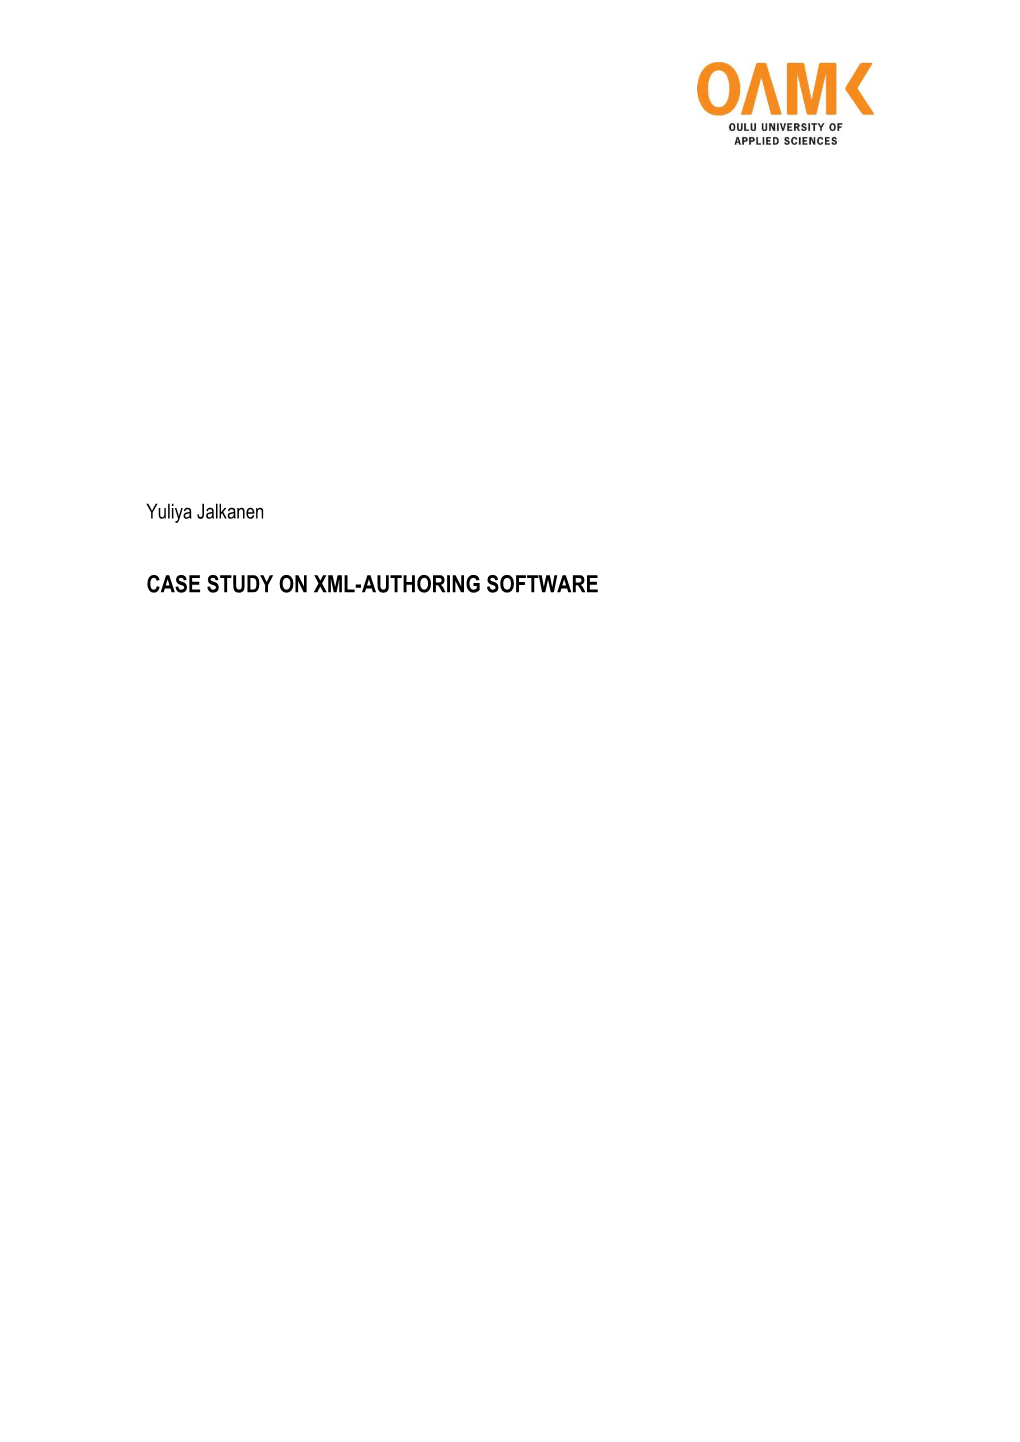 Case Study on Xml-Authoring Software